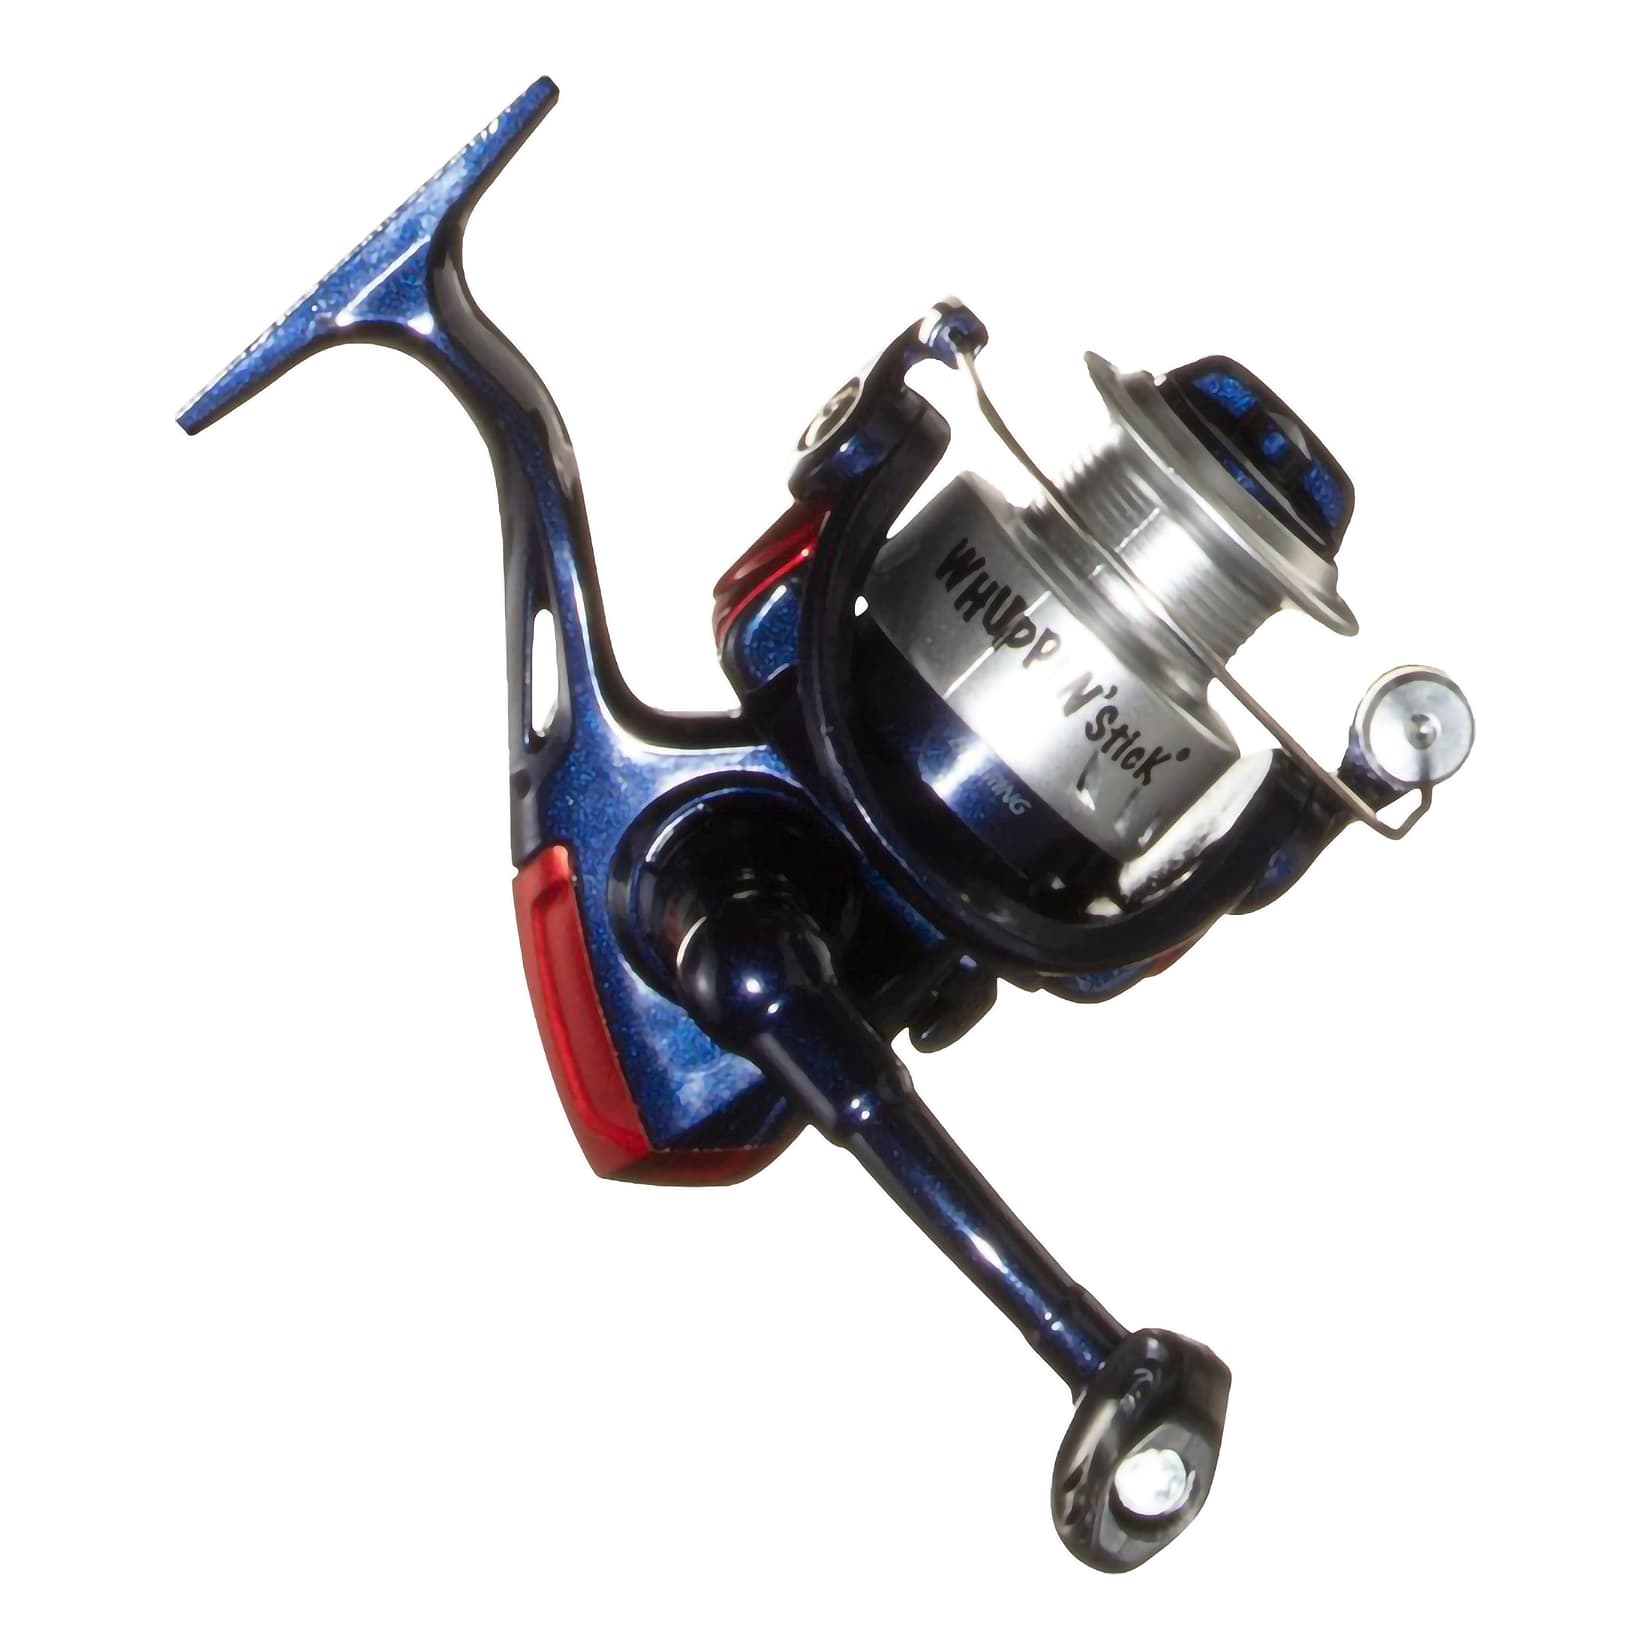 Inline & Straight Line Ice Fishing Spinning Reels: Canadian Ice